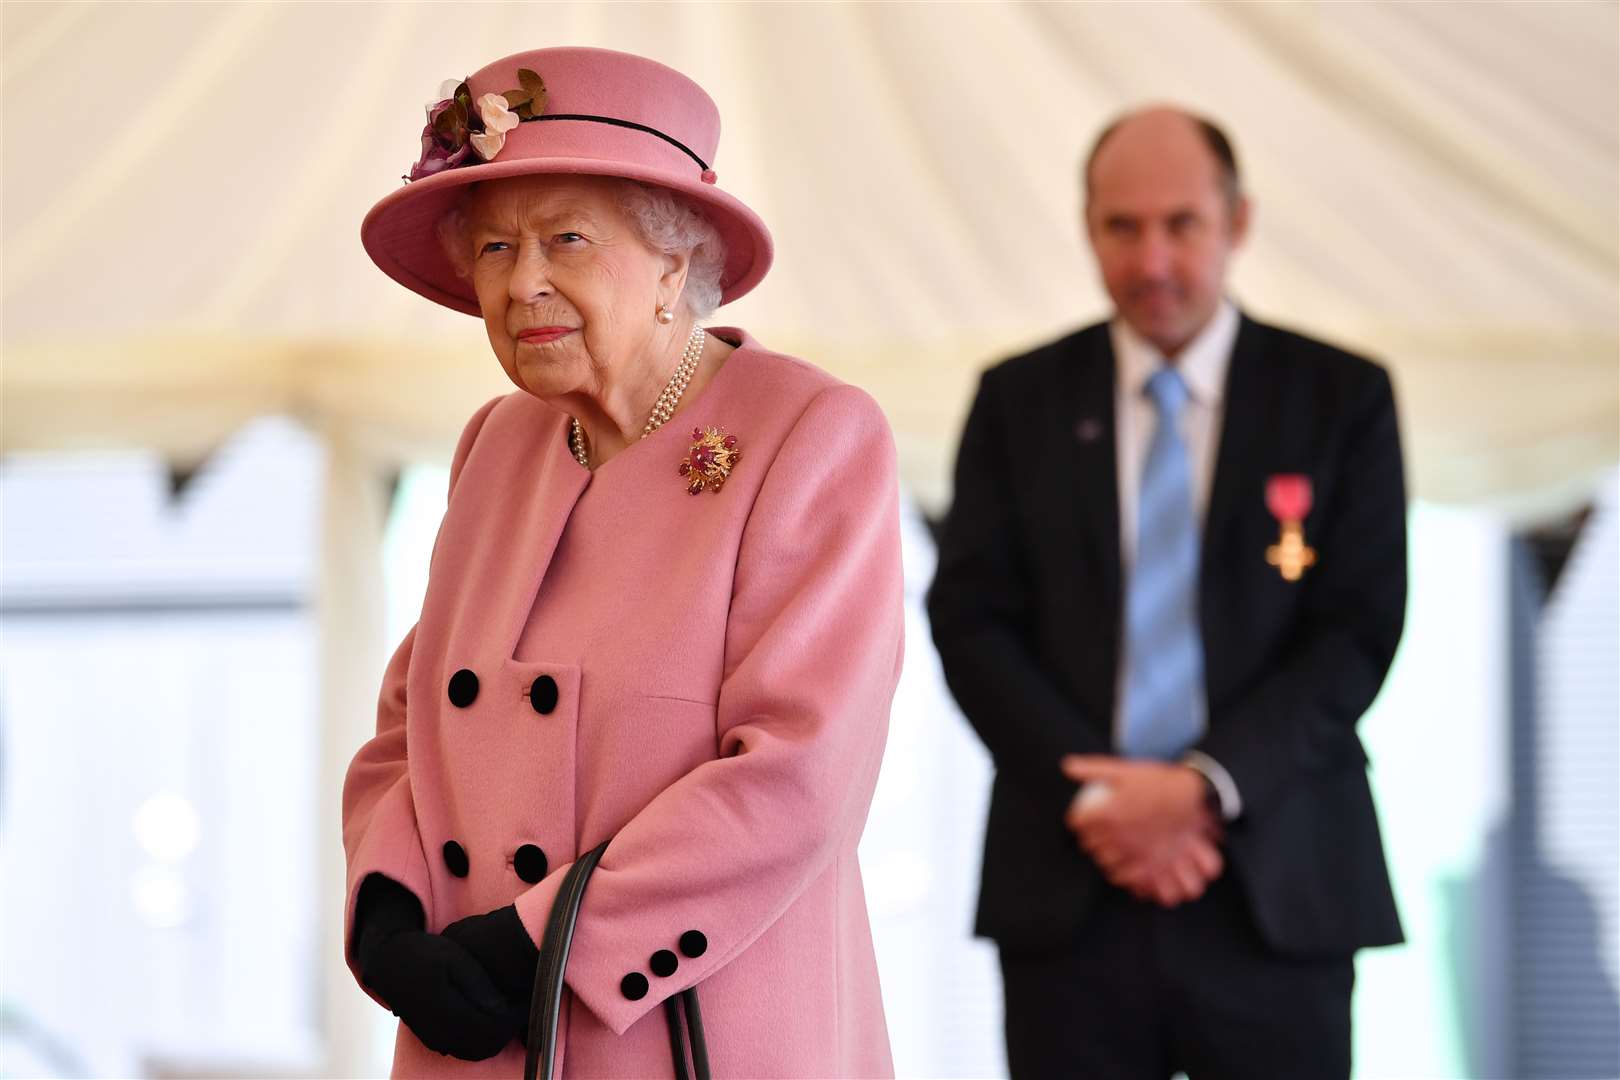 The visit marked the first time the Queen has ventured outside a royal residence since before lockdown (Ben Stansall/PA)